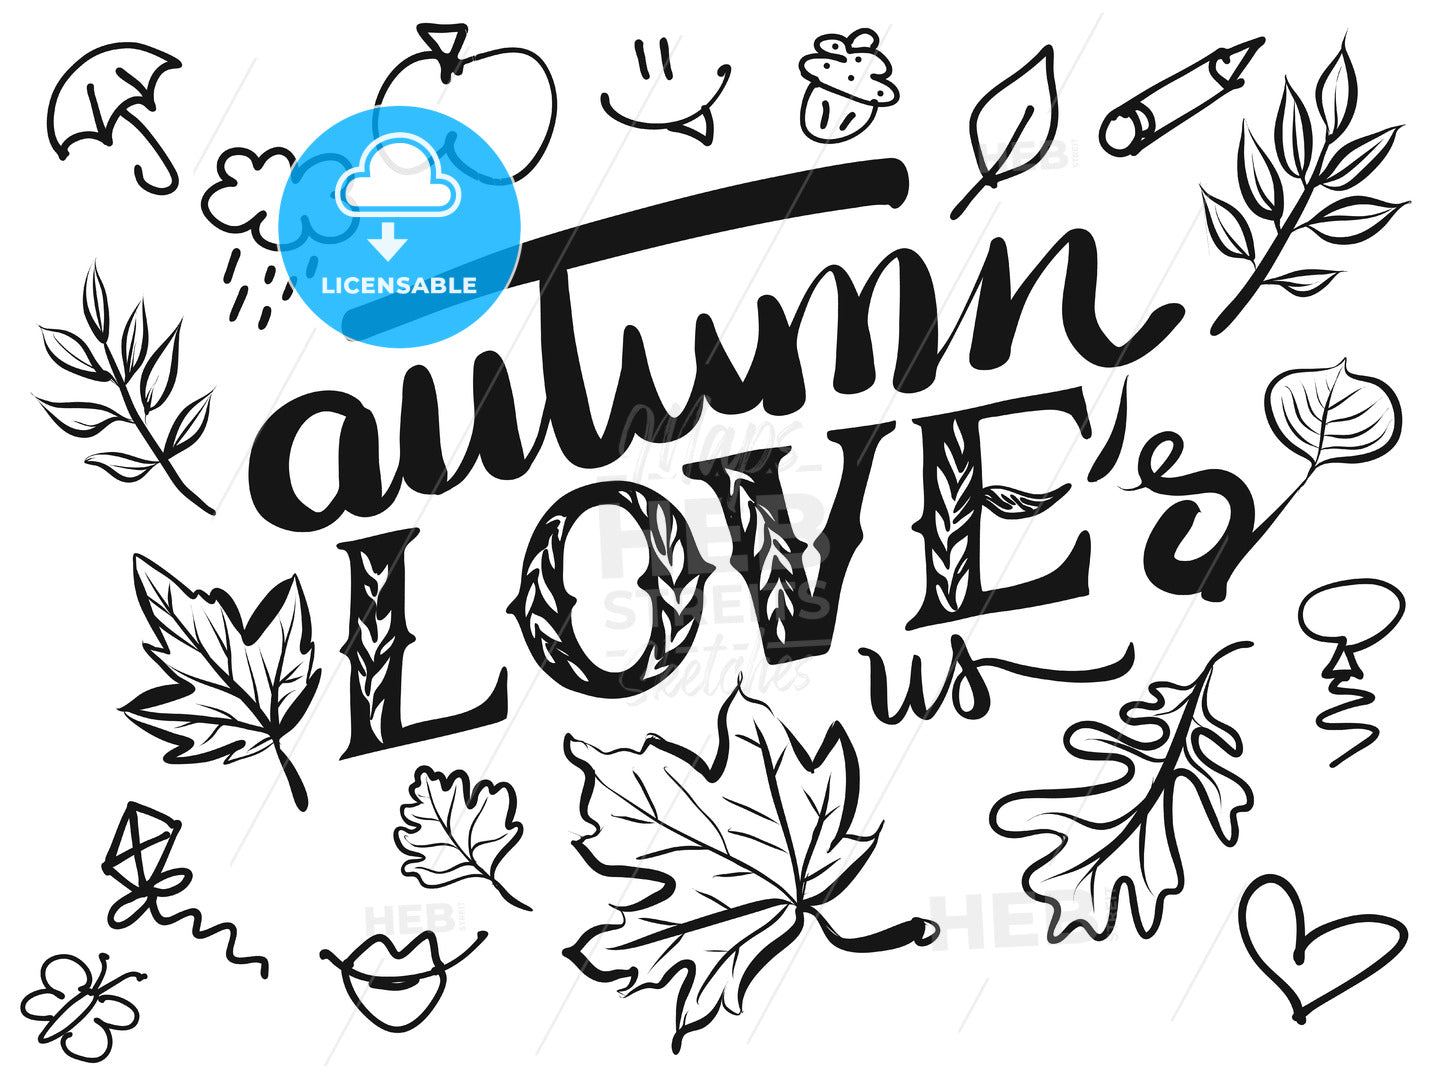 Autumn Loves us Typo and Icons – instant download